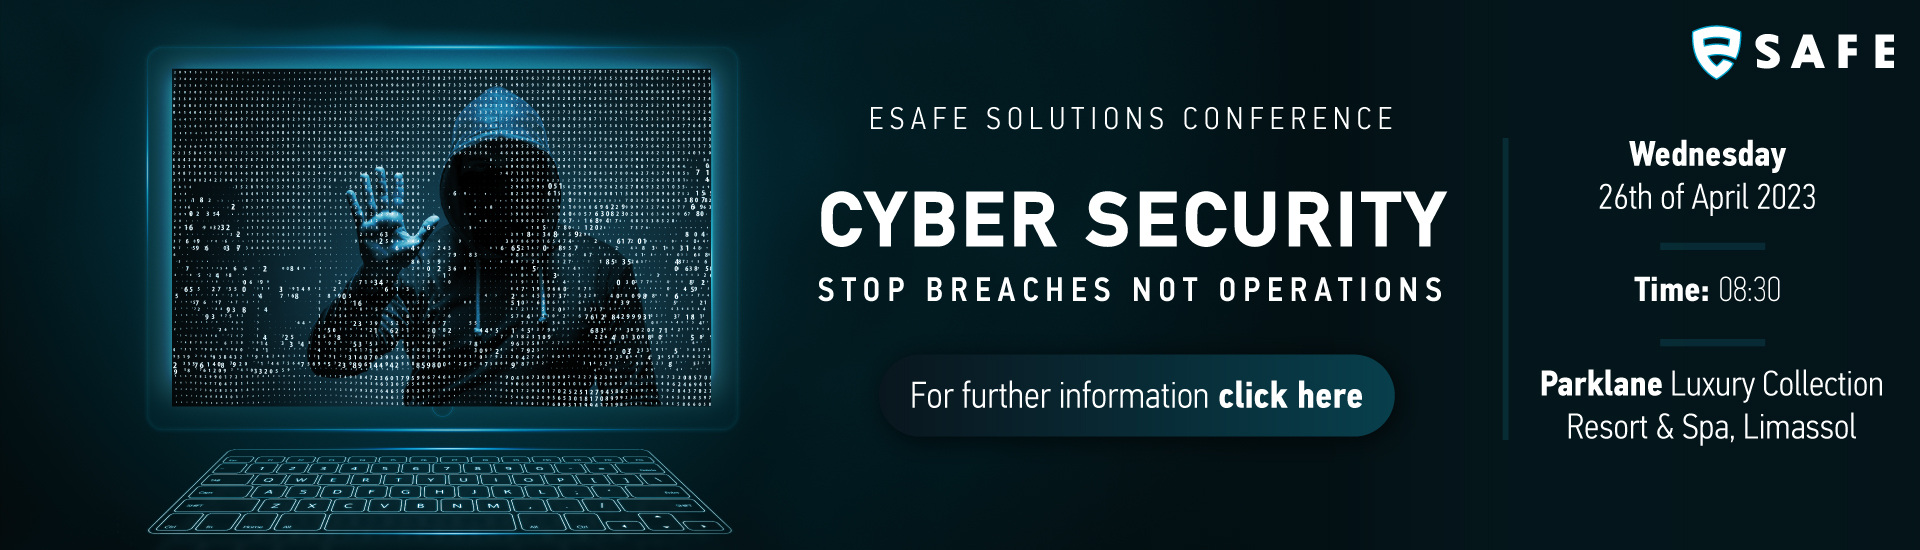 eSafe Solutions Conference: CYBER Security Stop Breaches Not Operations